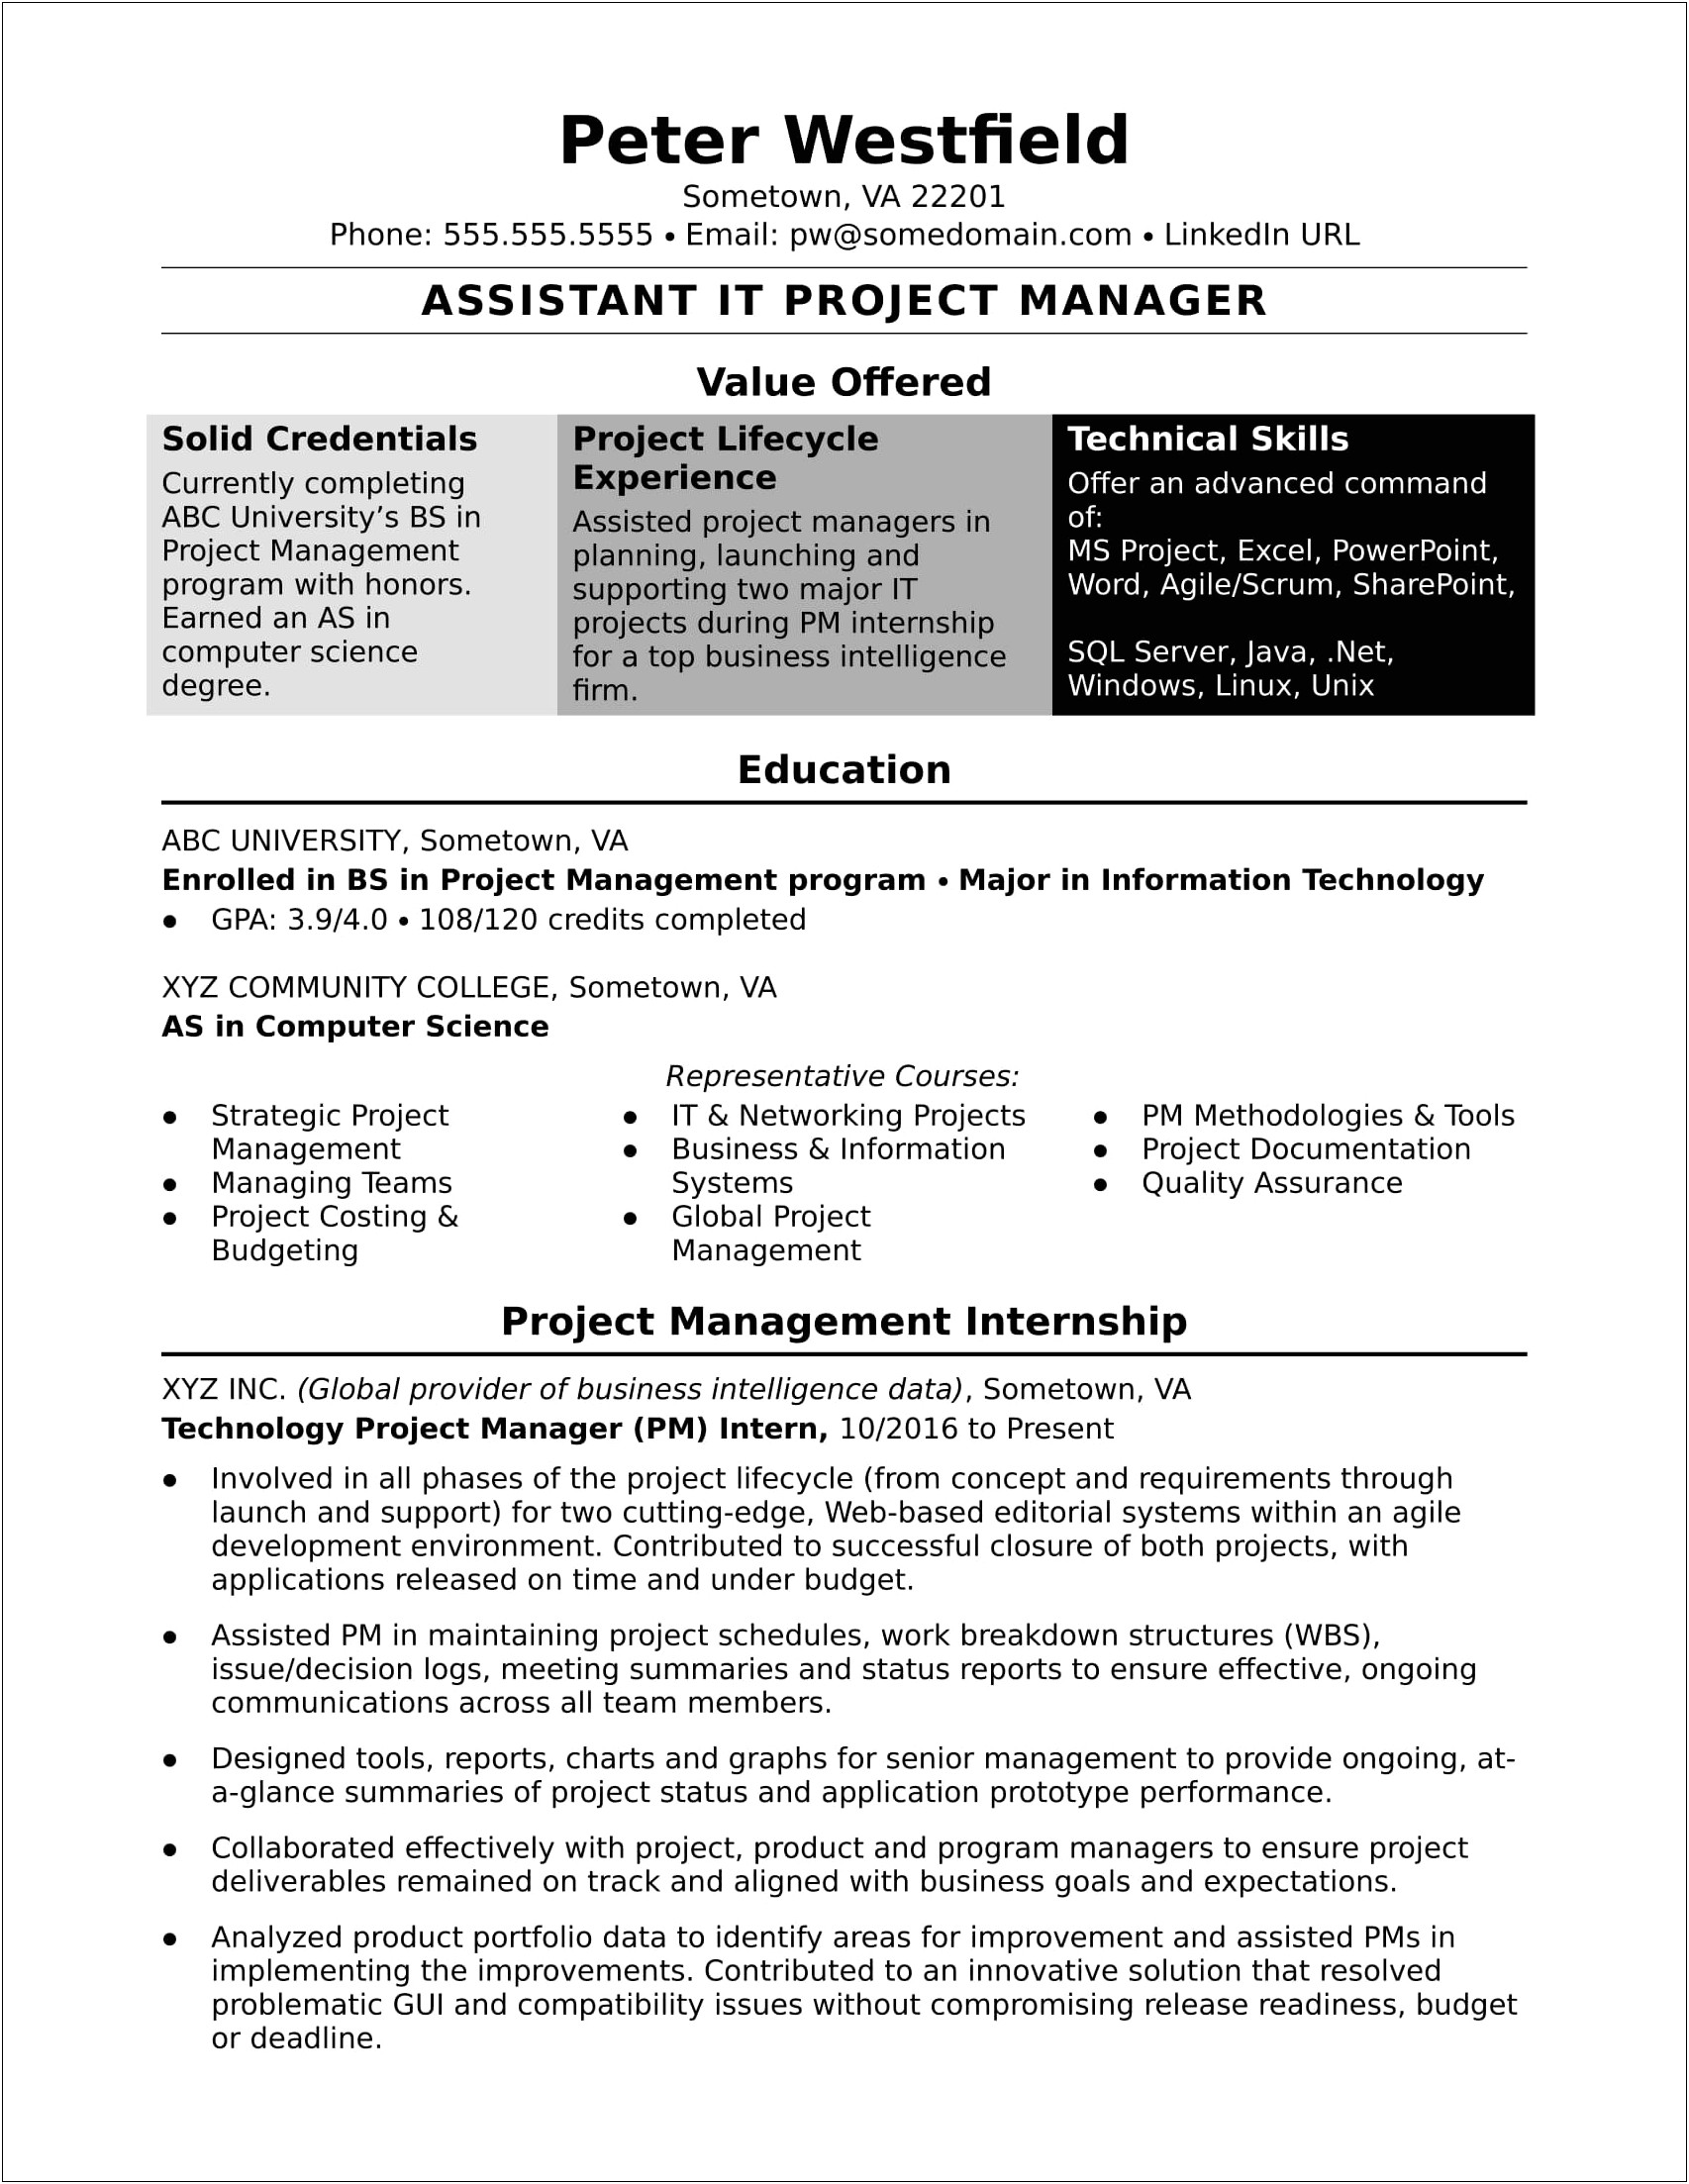 Professional Profile Resume Assistant Manager